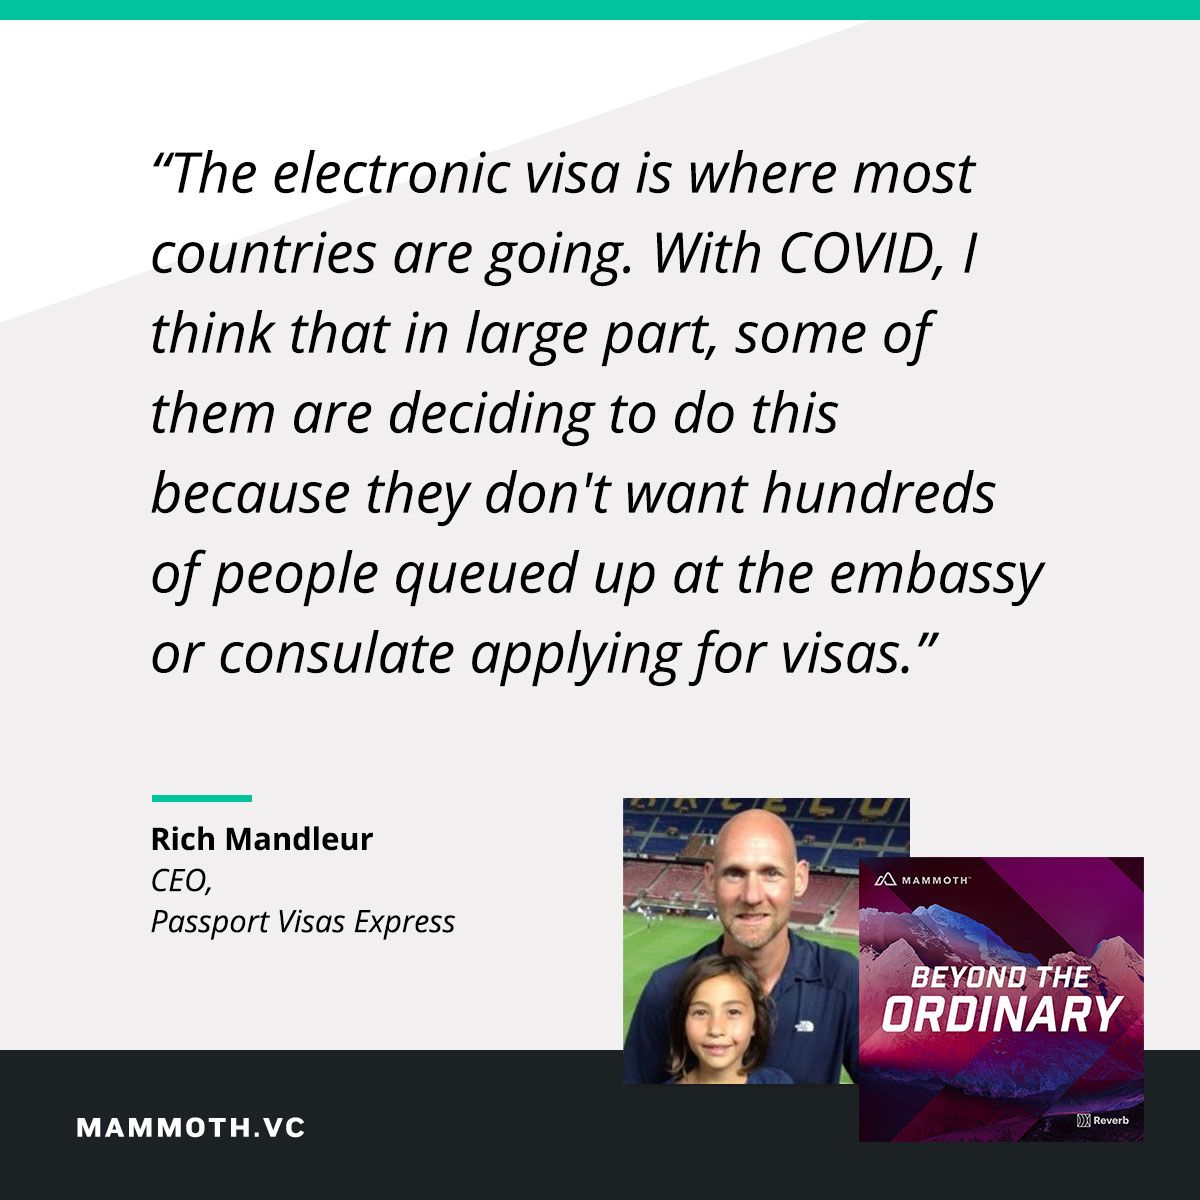 Electronic visas are where most countries are going